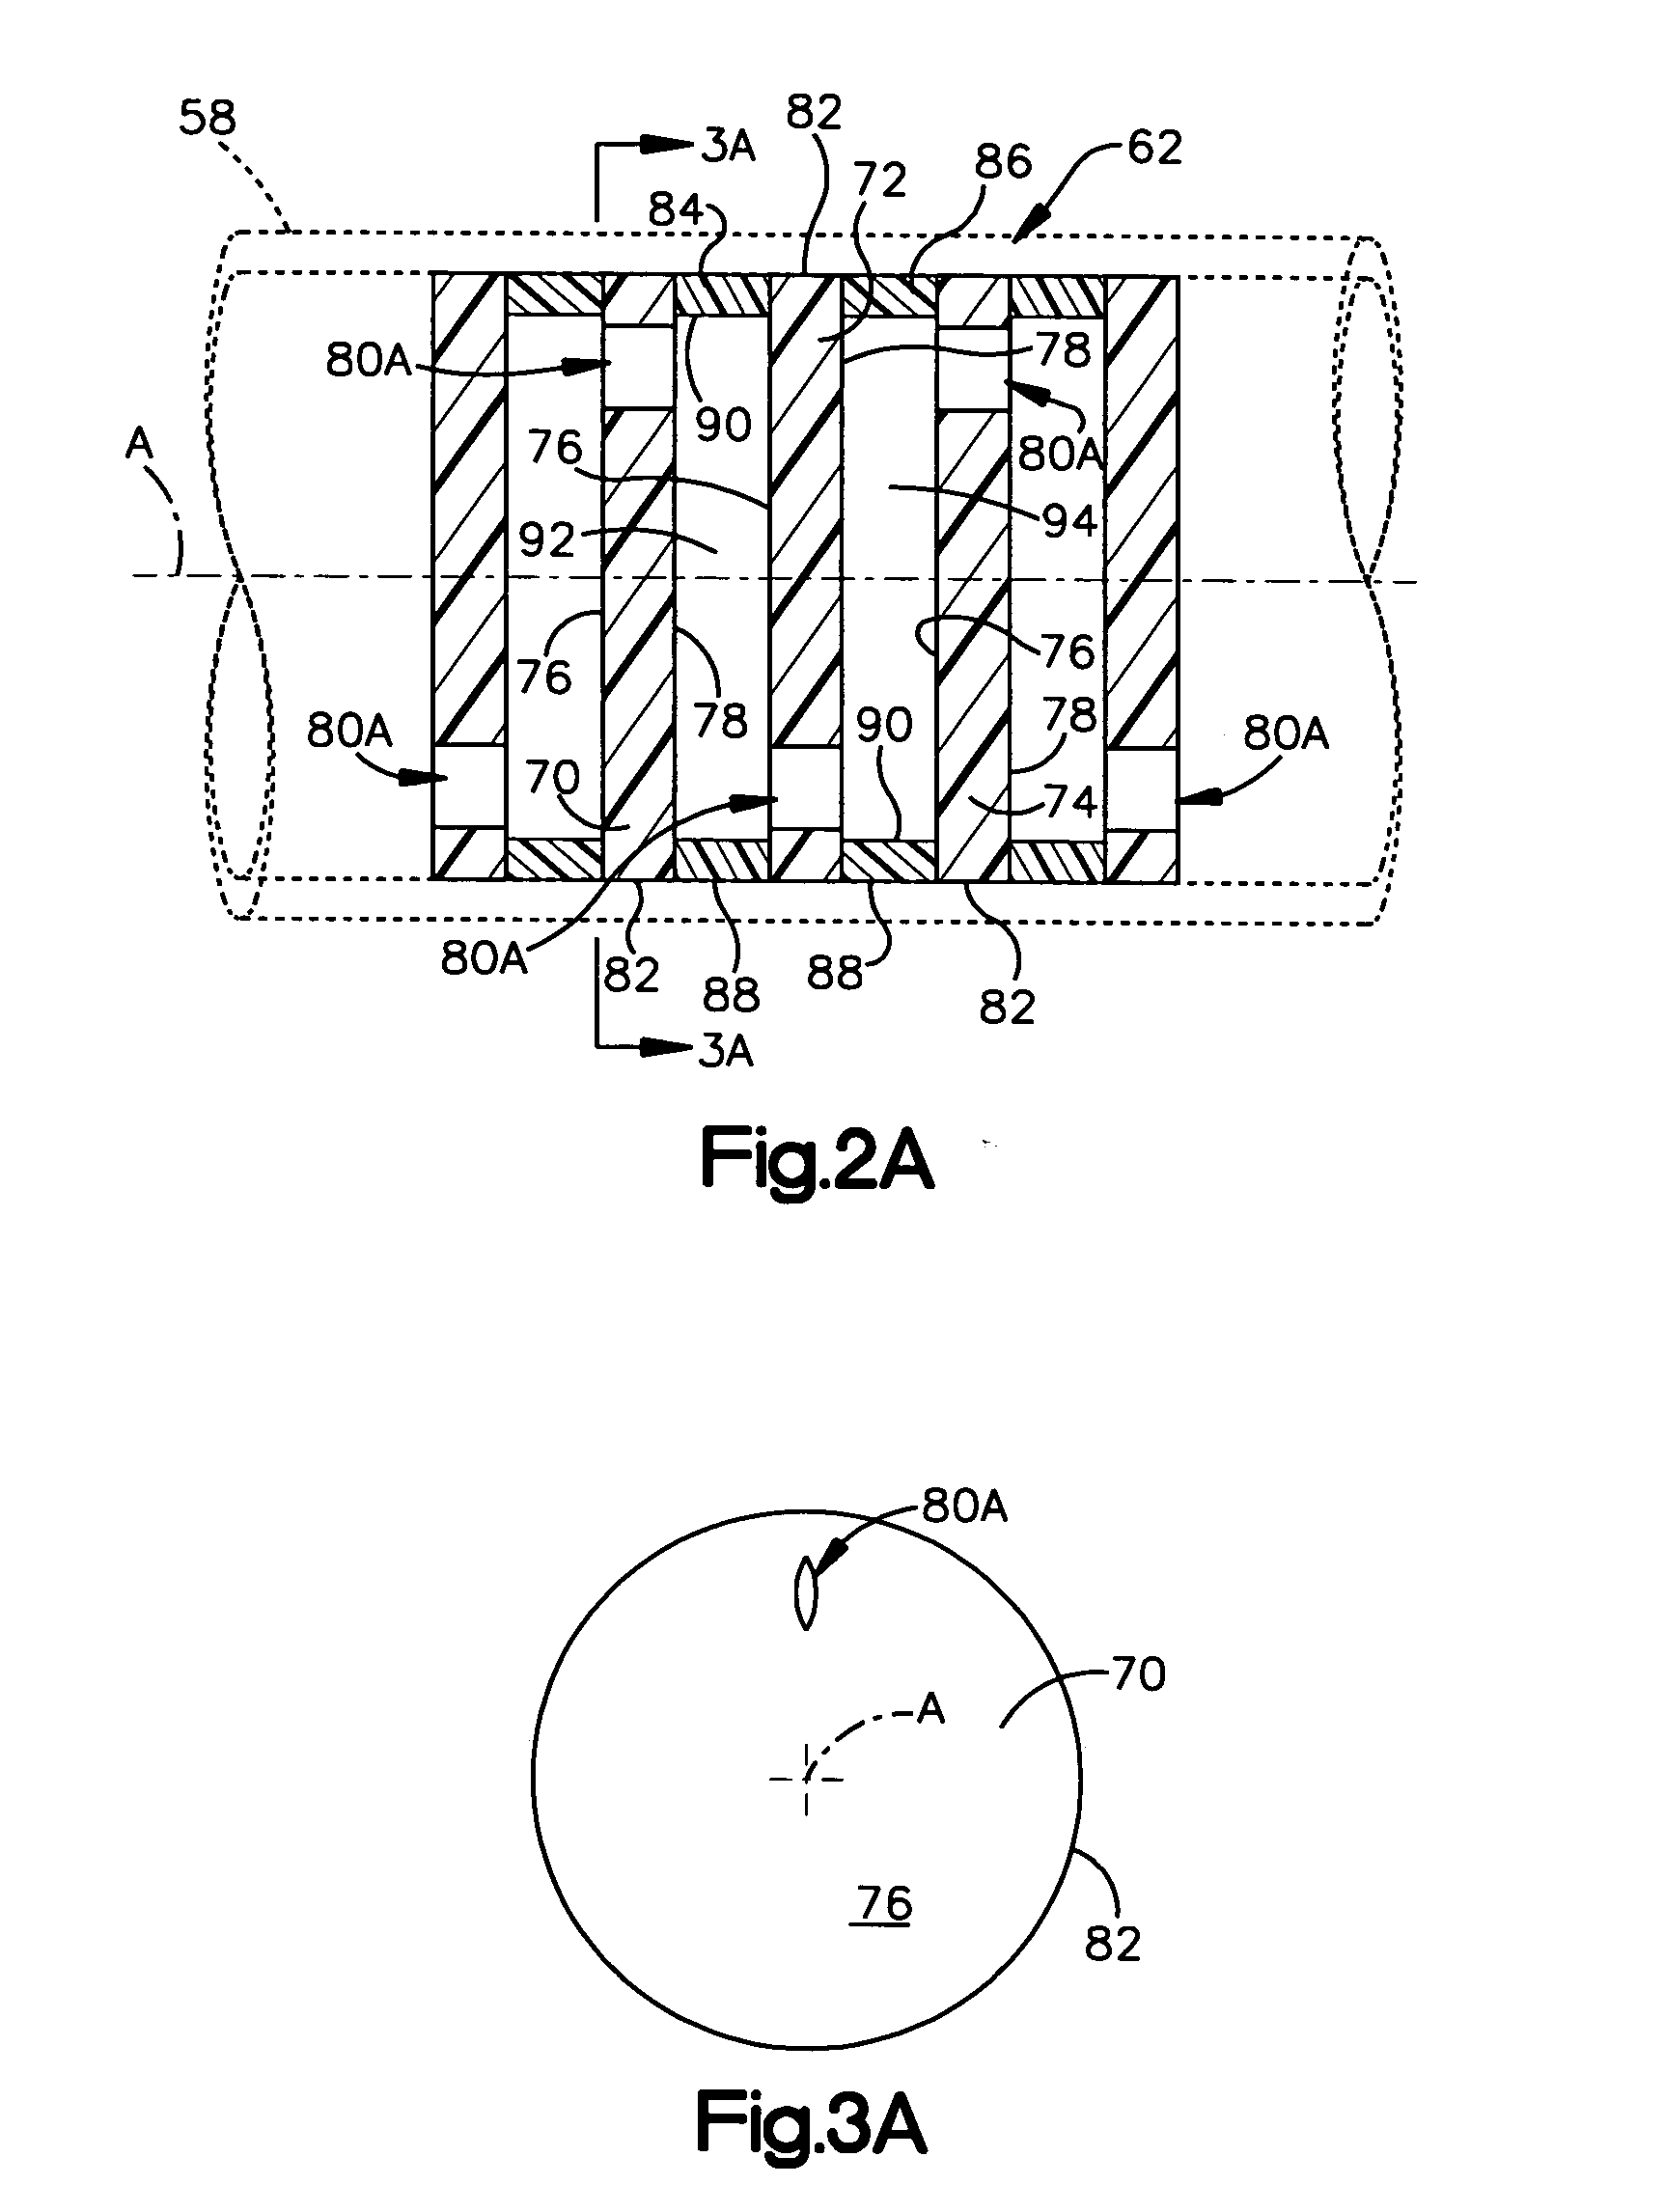 Device for controlling fluid flow in an aspiration system